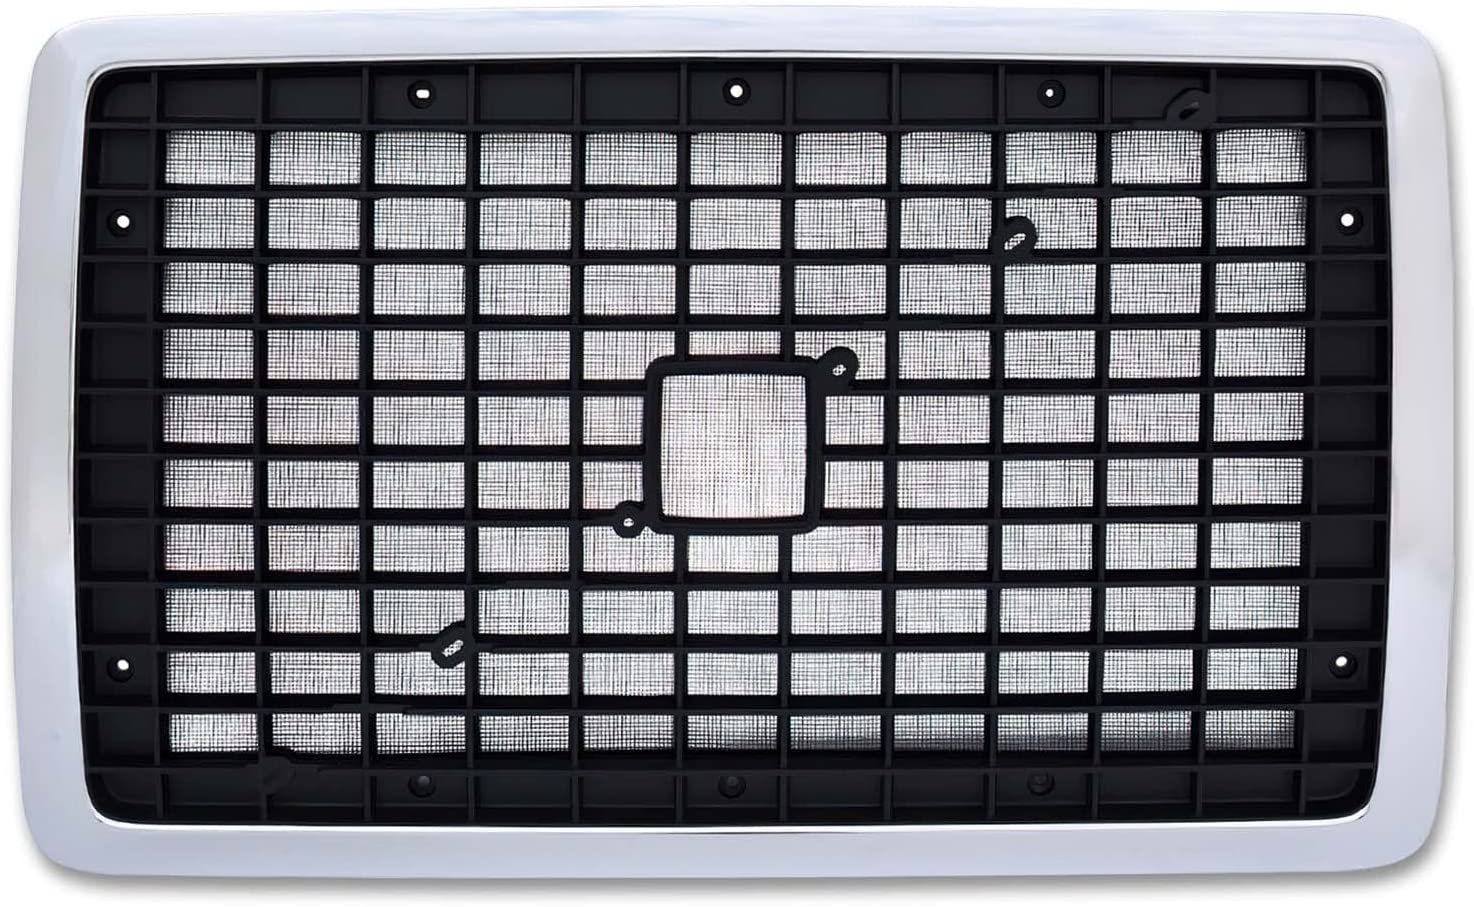 KOZAK compatible with Volvo VNL 2004-2016 Truck Accessories Aftermarket Chrome Finish Front Grille with Bug Net Screen PLUS Logo Emblem with Stripe, 2x22 inch Windshield Wipers and KOZAK Vest - image 2 of 7